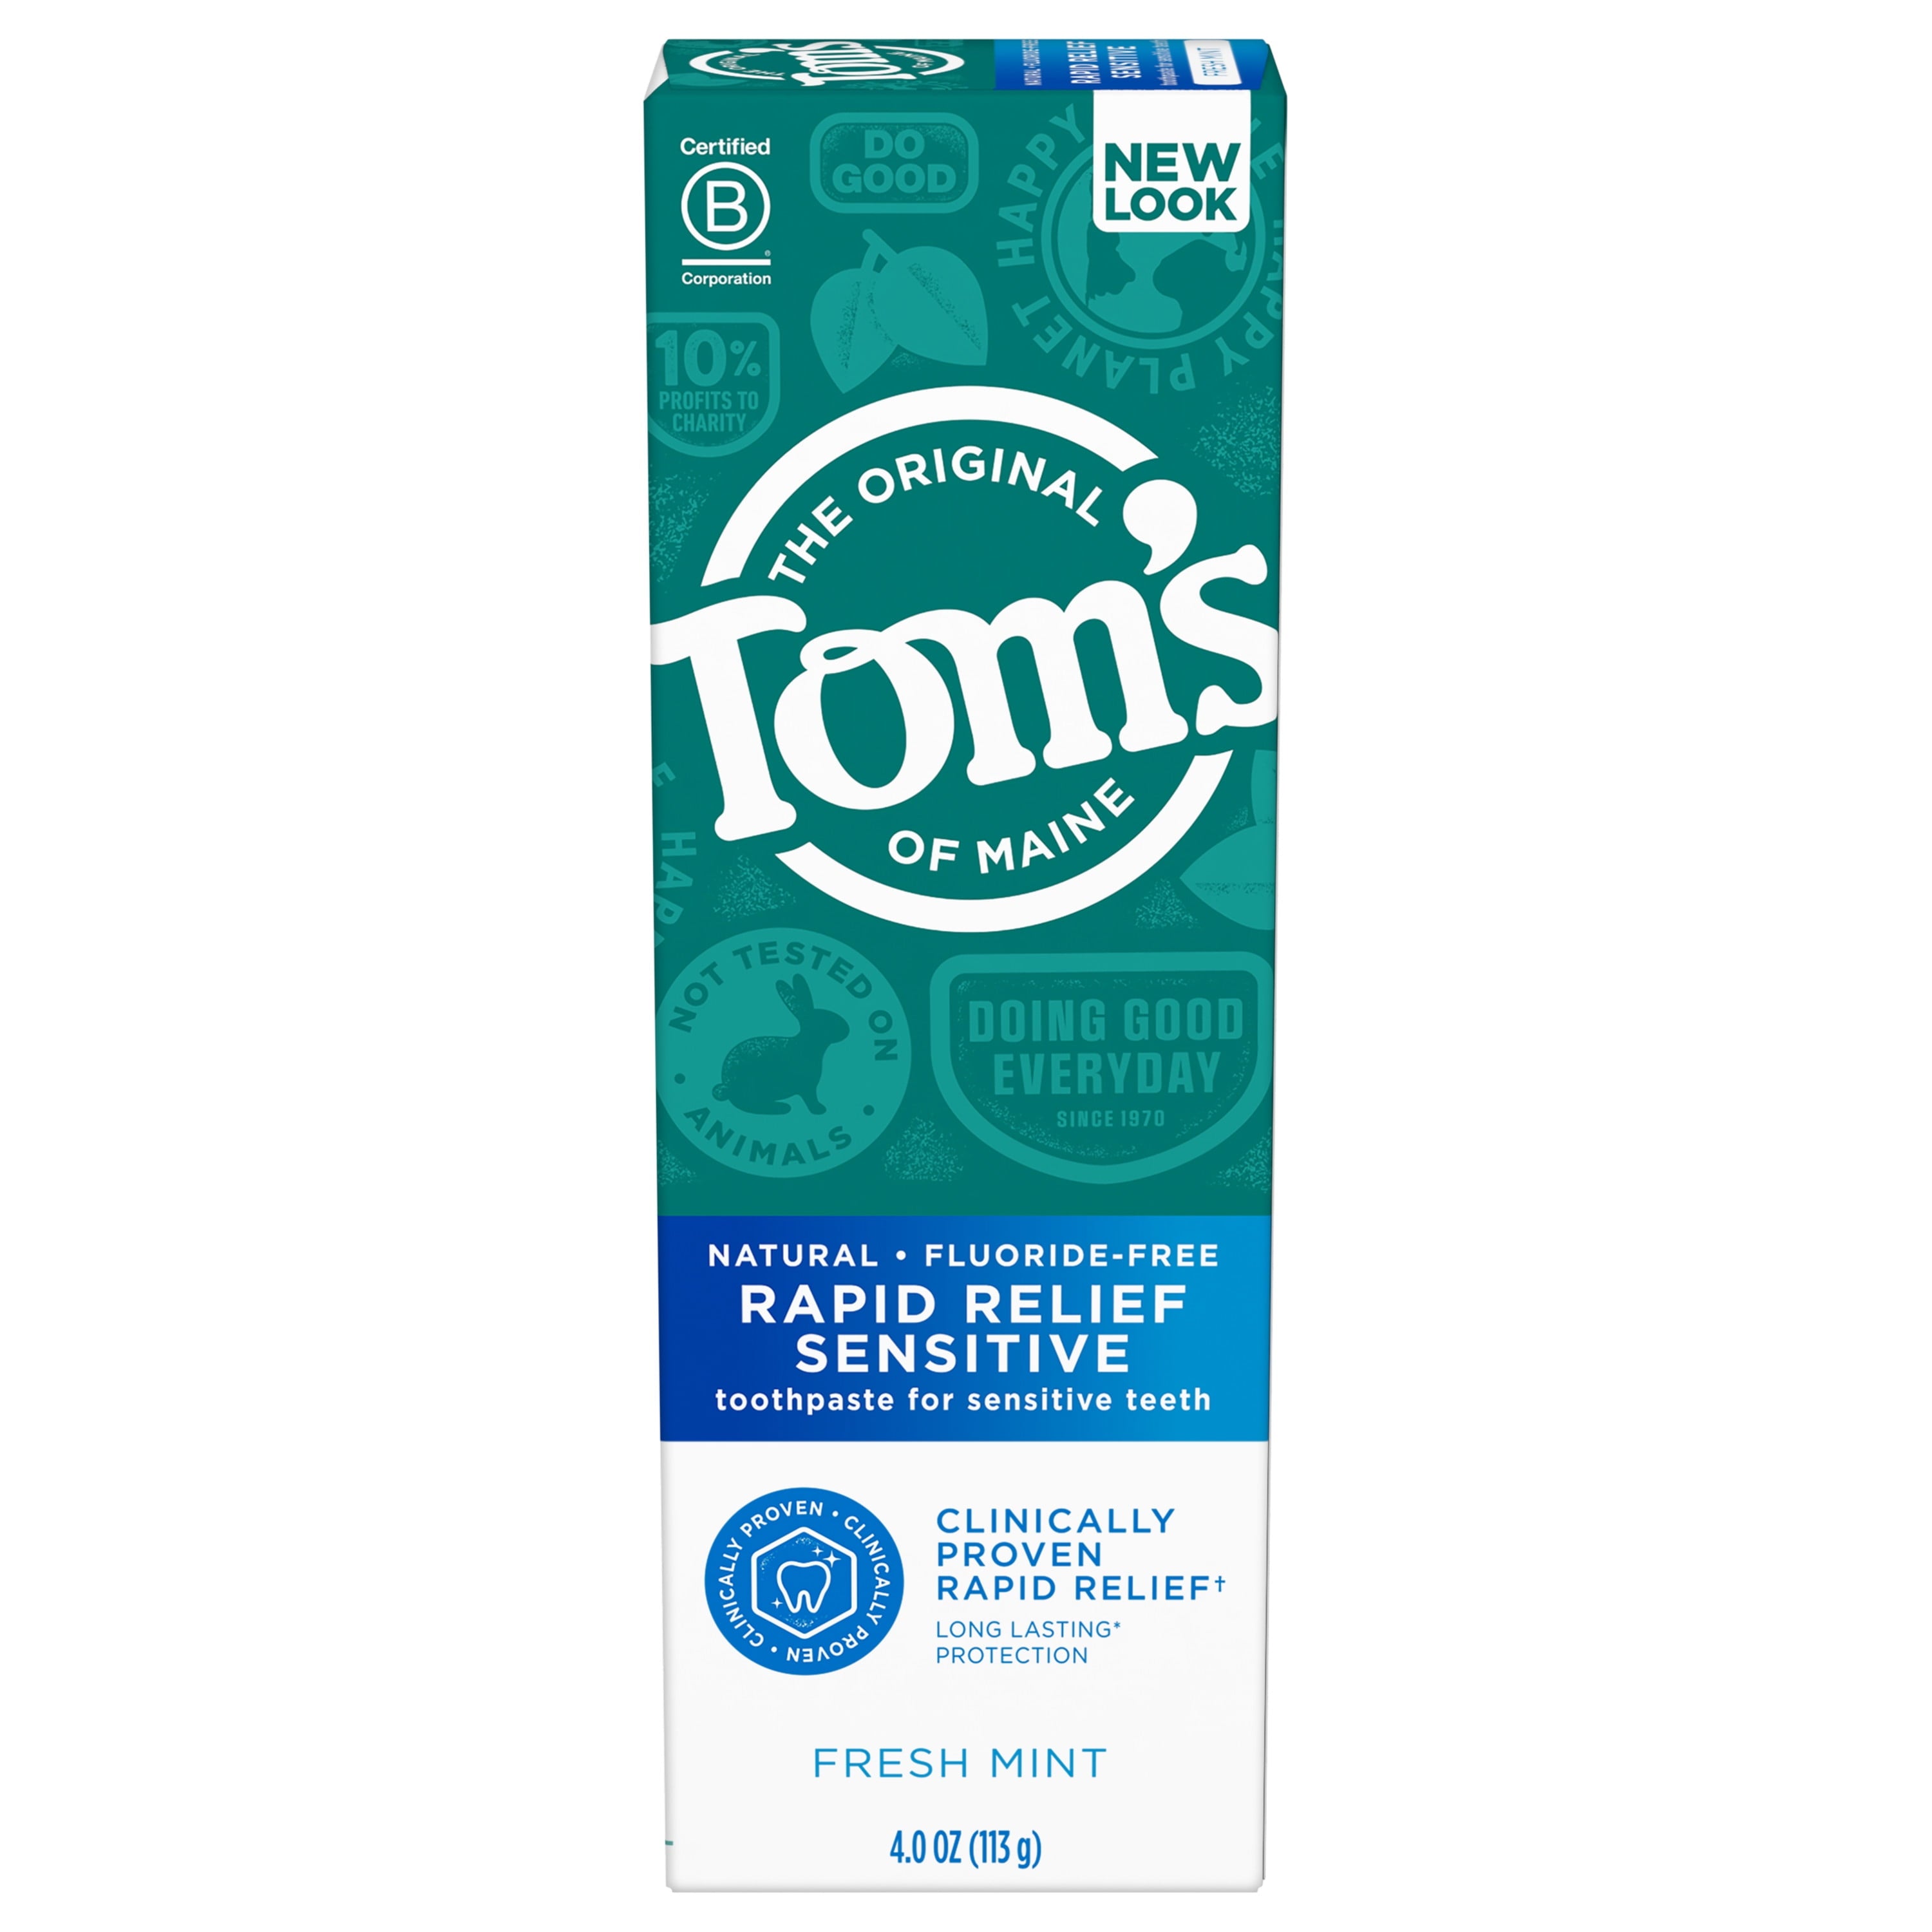 Tom's of Maine Rapid Relief Sensitive Fresh Mint Toothpaste Fluoride-Free 4 Oz Tube